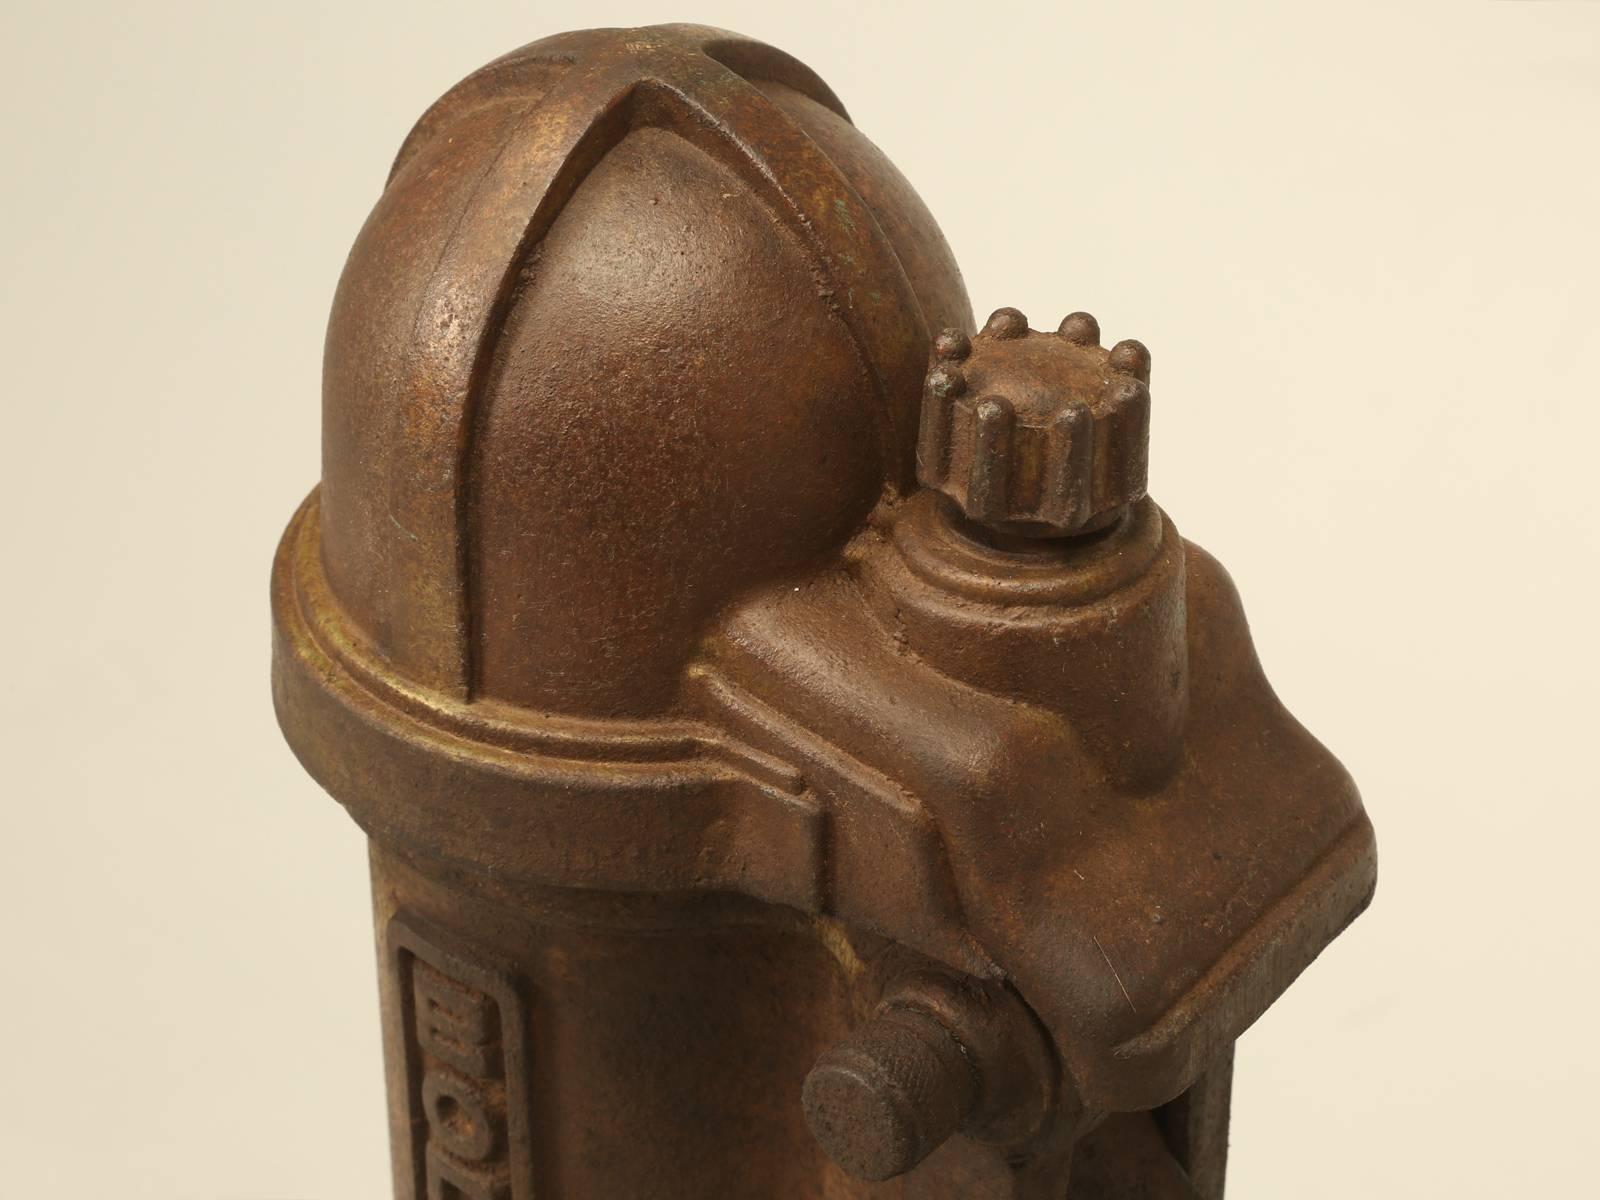 French water pump made, circa 1820, which would make for a wonderful water fountain. The cast iron pump should last forever outside. We have several listed on 1stdibs for sale and all came from a retired French antique dealer in Brittany.